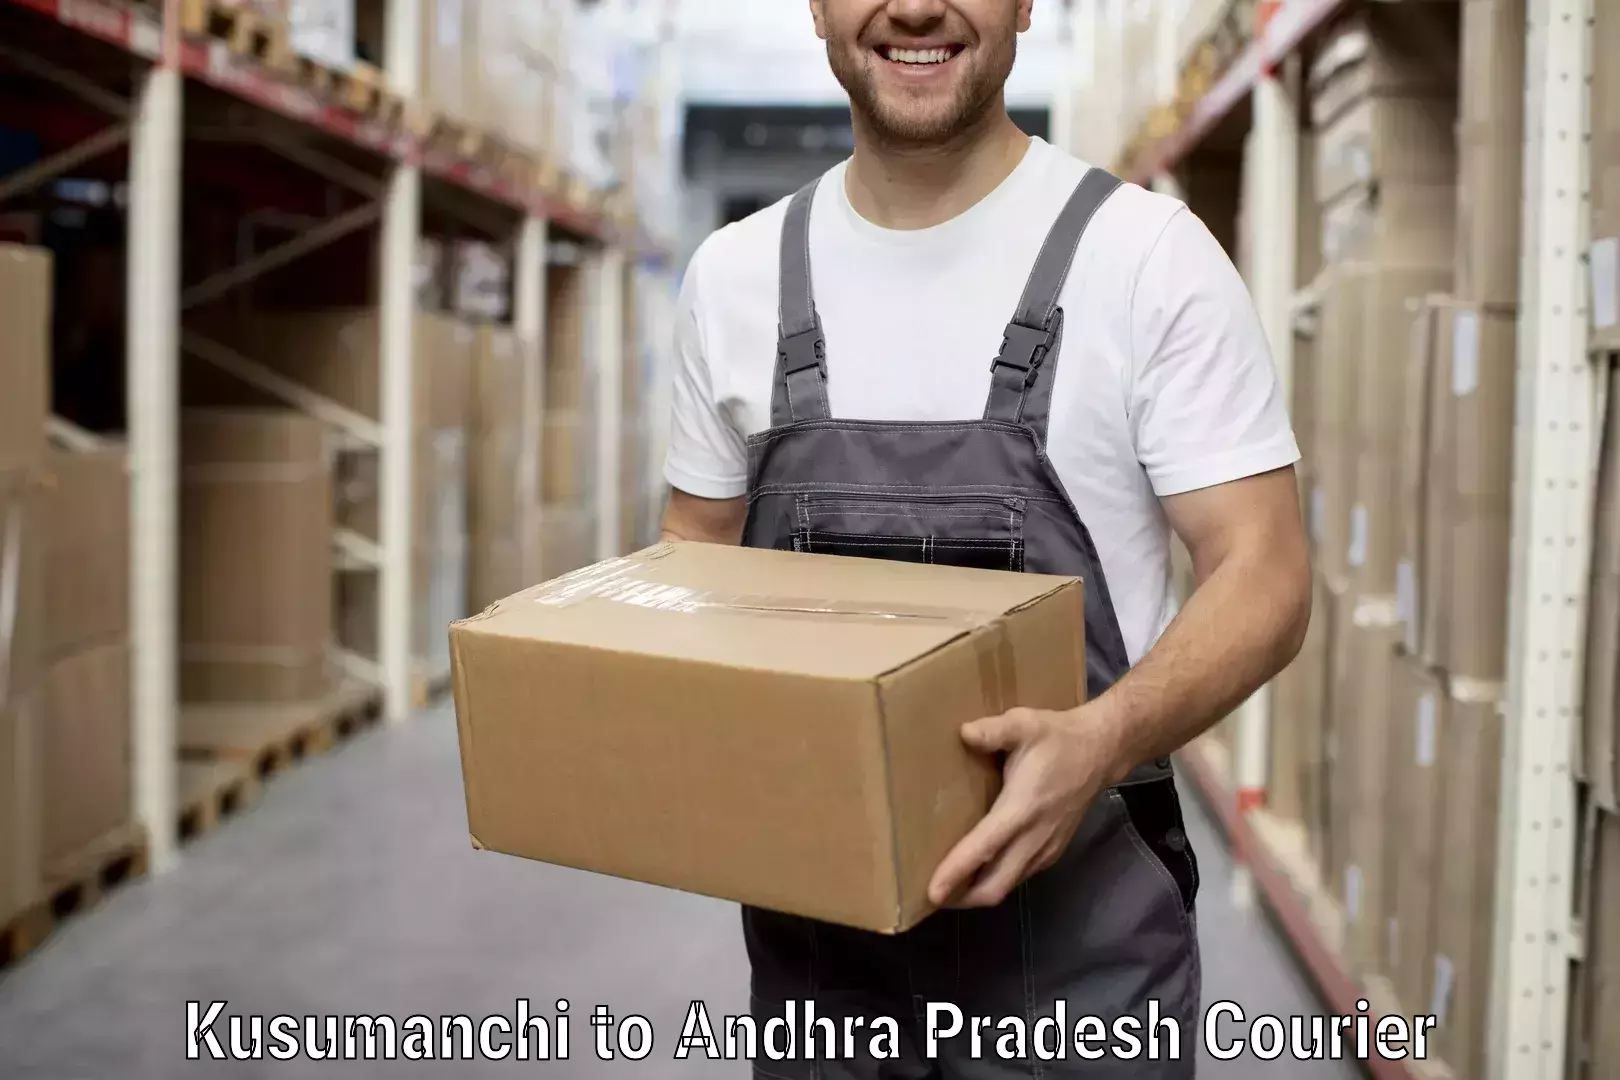 Quality relocation services in Kusumanchi to Chodavaram